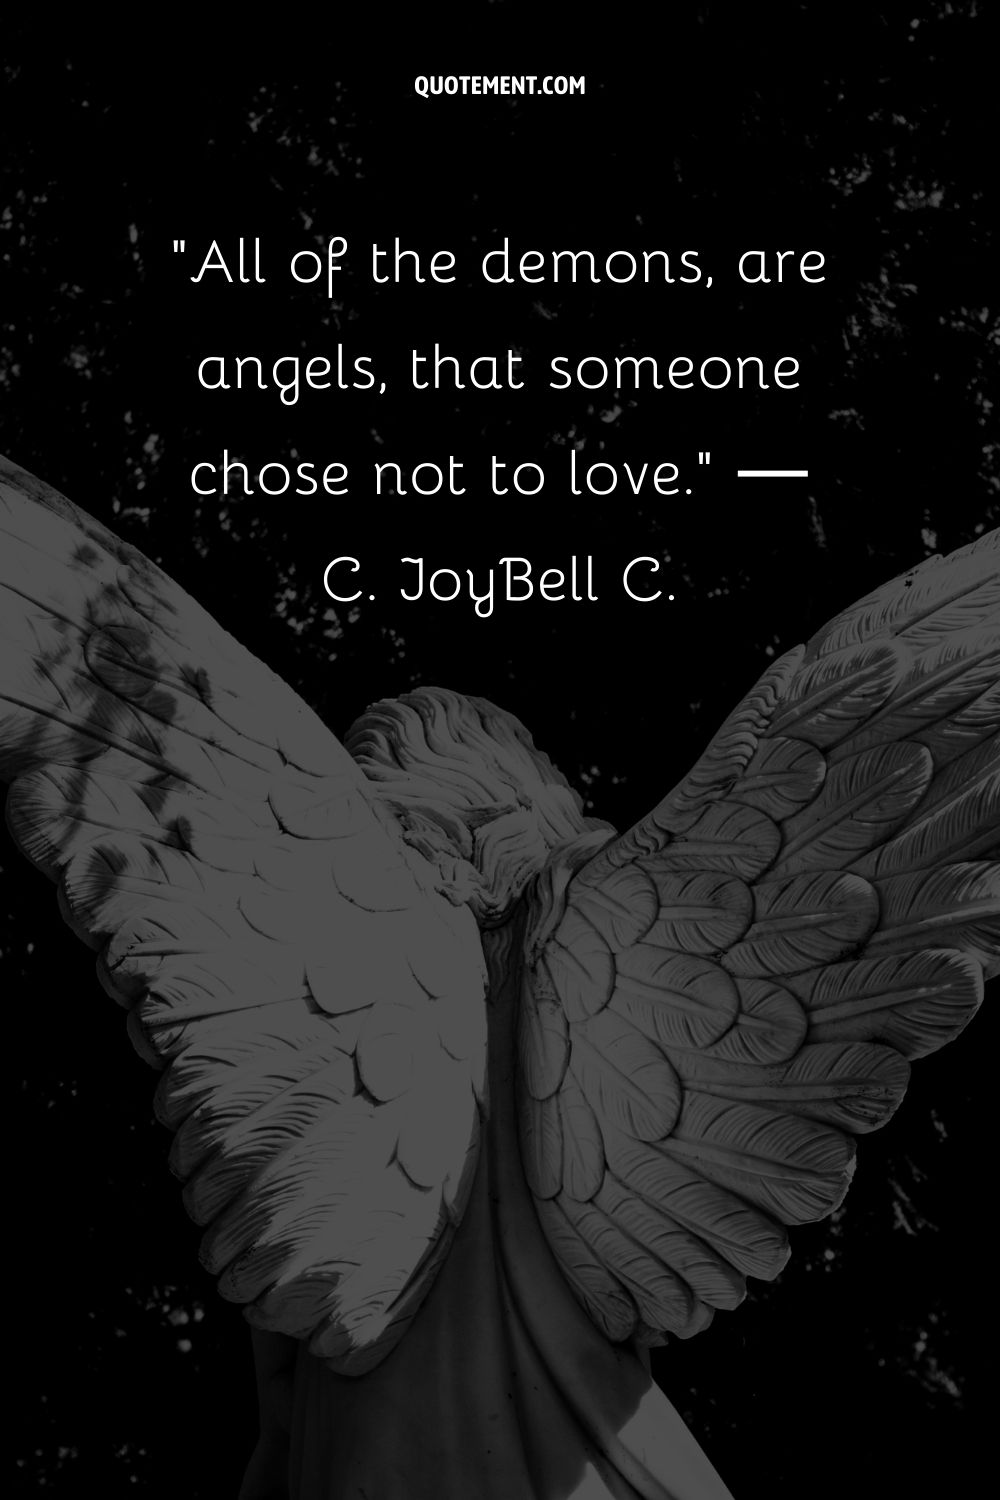 All of the demons, are angels, that someone chose not to love.